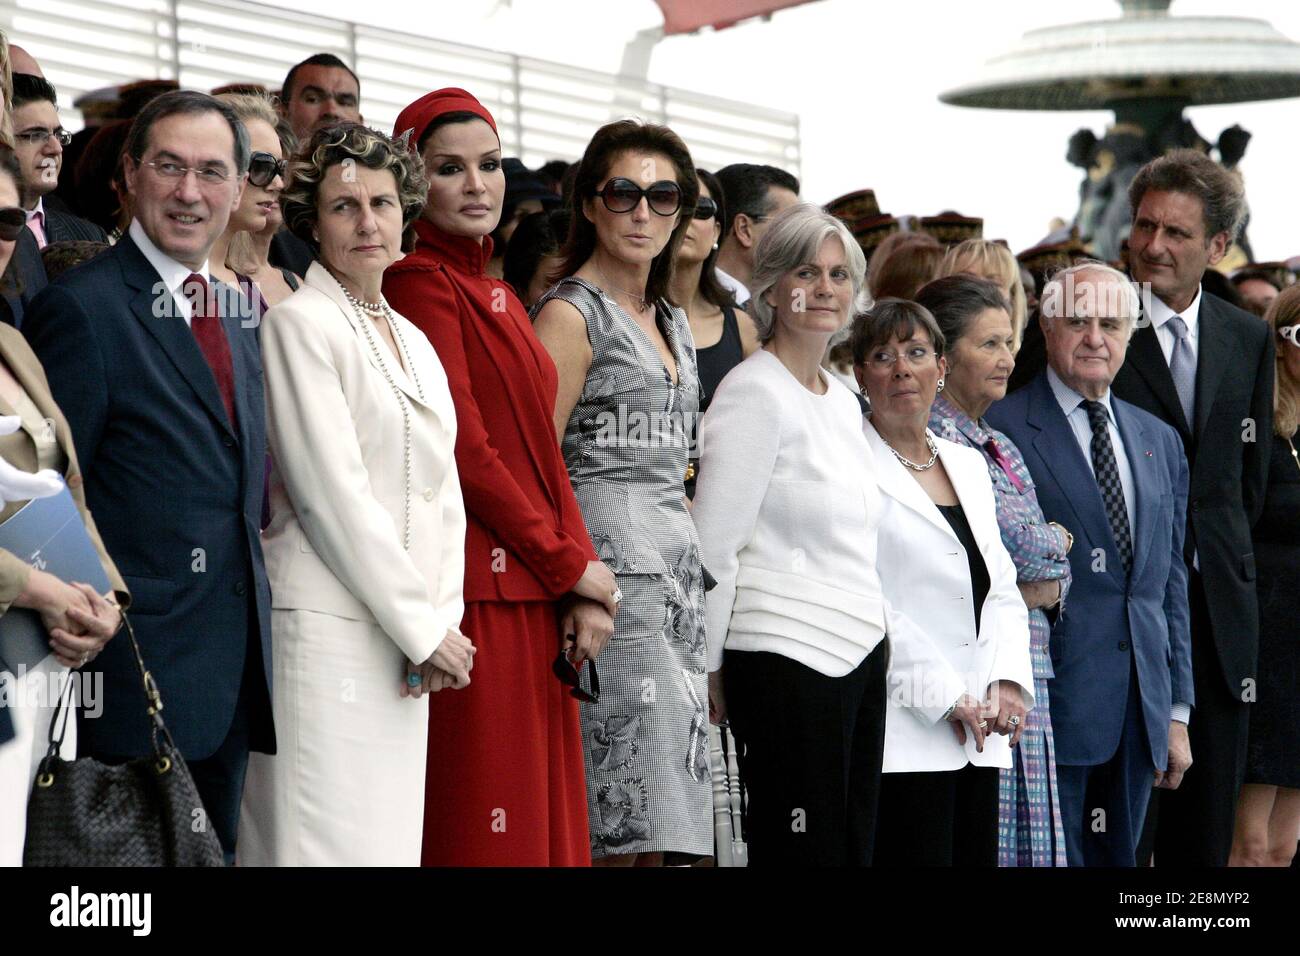 (L to R) French secretary general of the Elysee Palace Claude Gueant and his wife, Sheikha Moza bint Nasser al-Misn, Qatar's emir Sheikh Hamad bin Khalifa's wife, First Lady Cecilia Sarkozy, Former Health minister Simone Veil and her husband Antoine attend the parade down the Champs Elysees on Bastille Day in Paris, France on July 14, 2007. Nicolas Sarkozy presides for the first time over Bastille Day national holiday celebrations. Photo by Gilles Bassignac/Pool/ABACAPRESS.COM Stock Photo